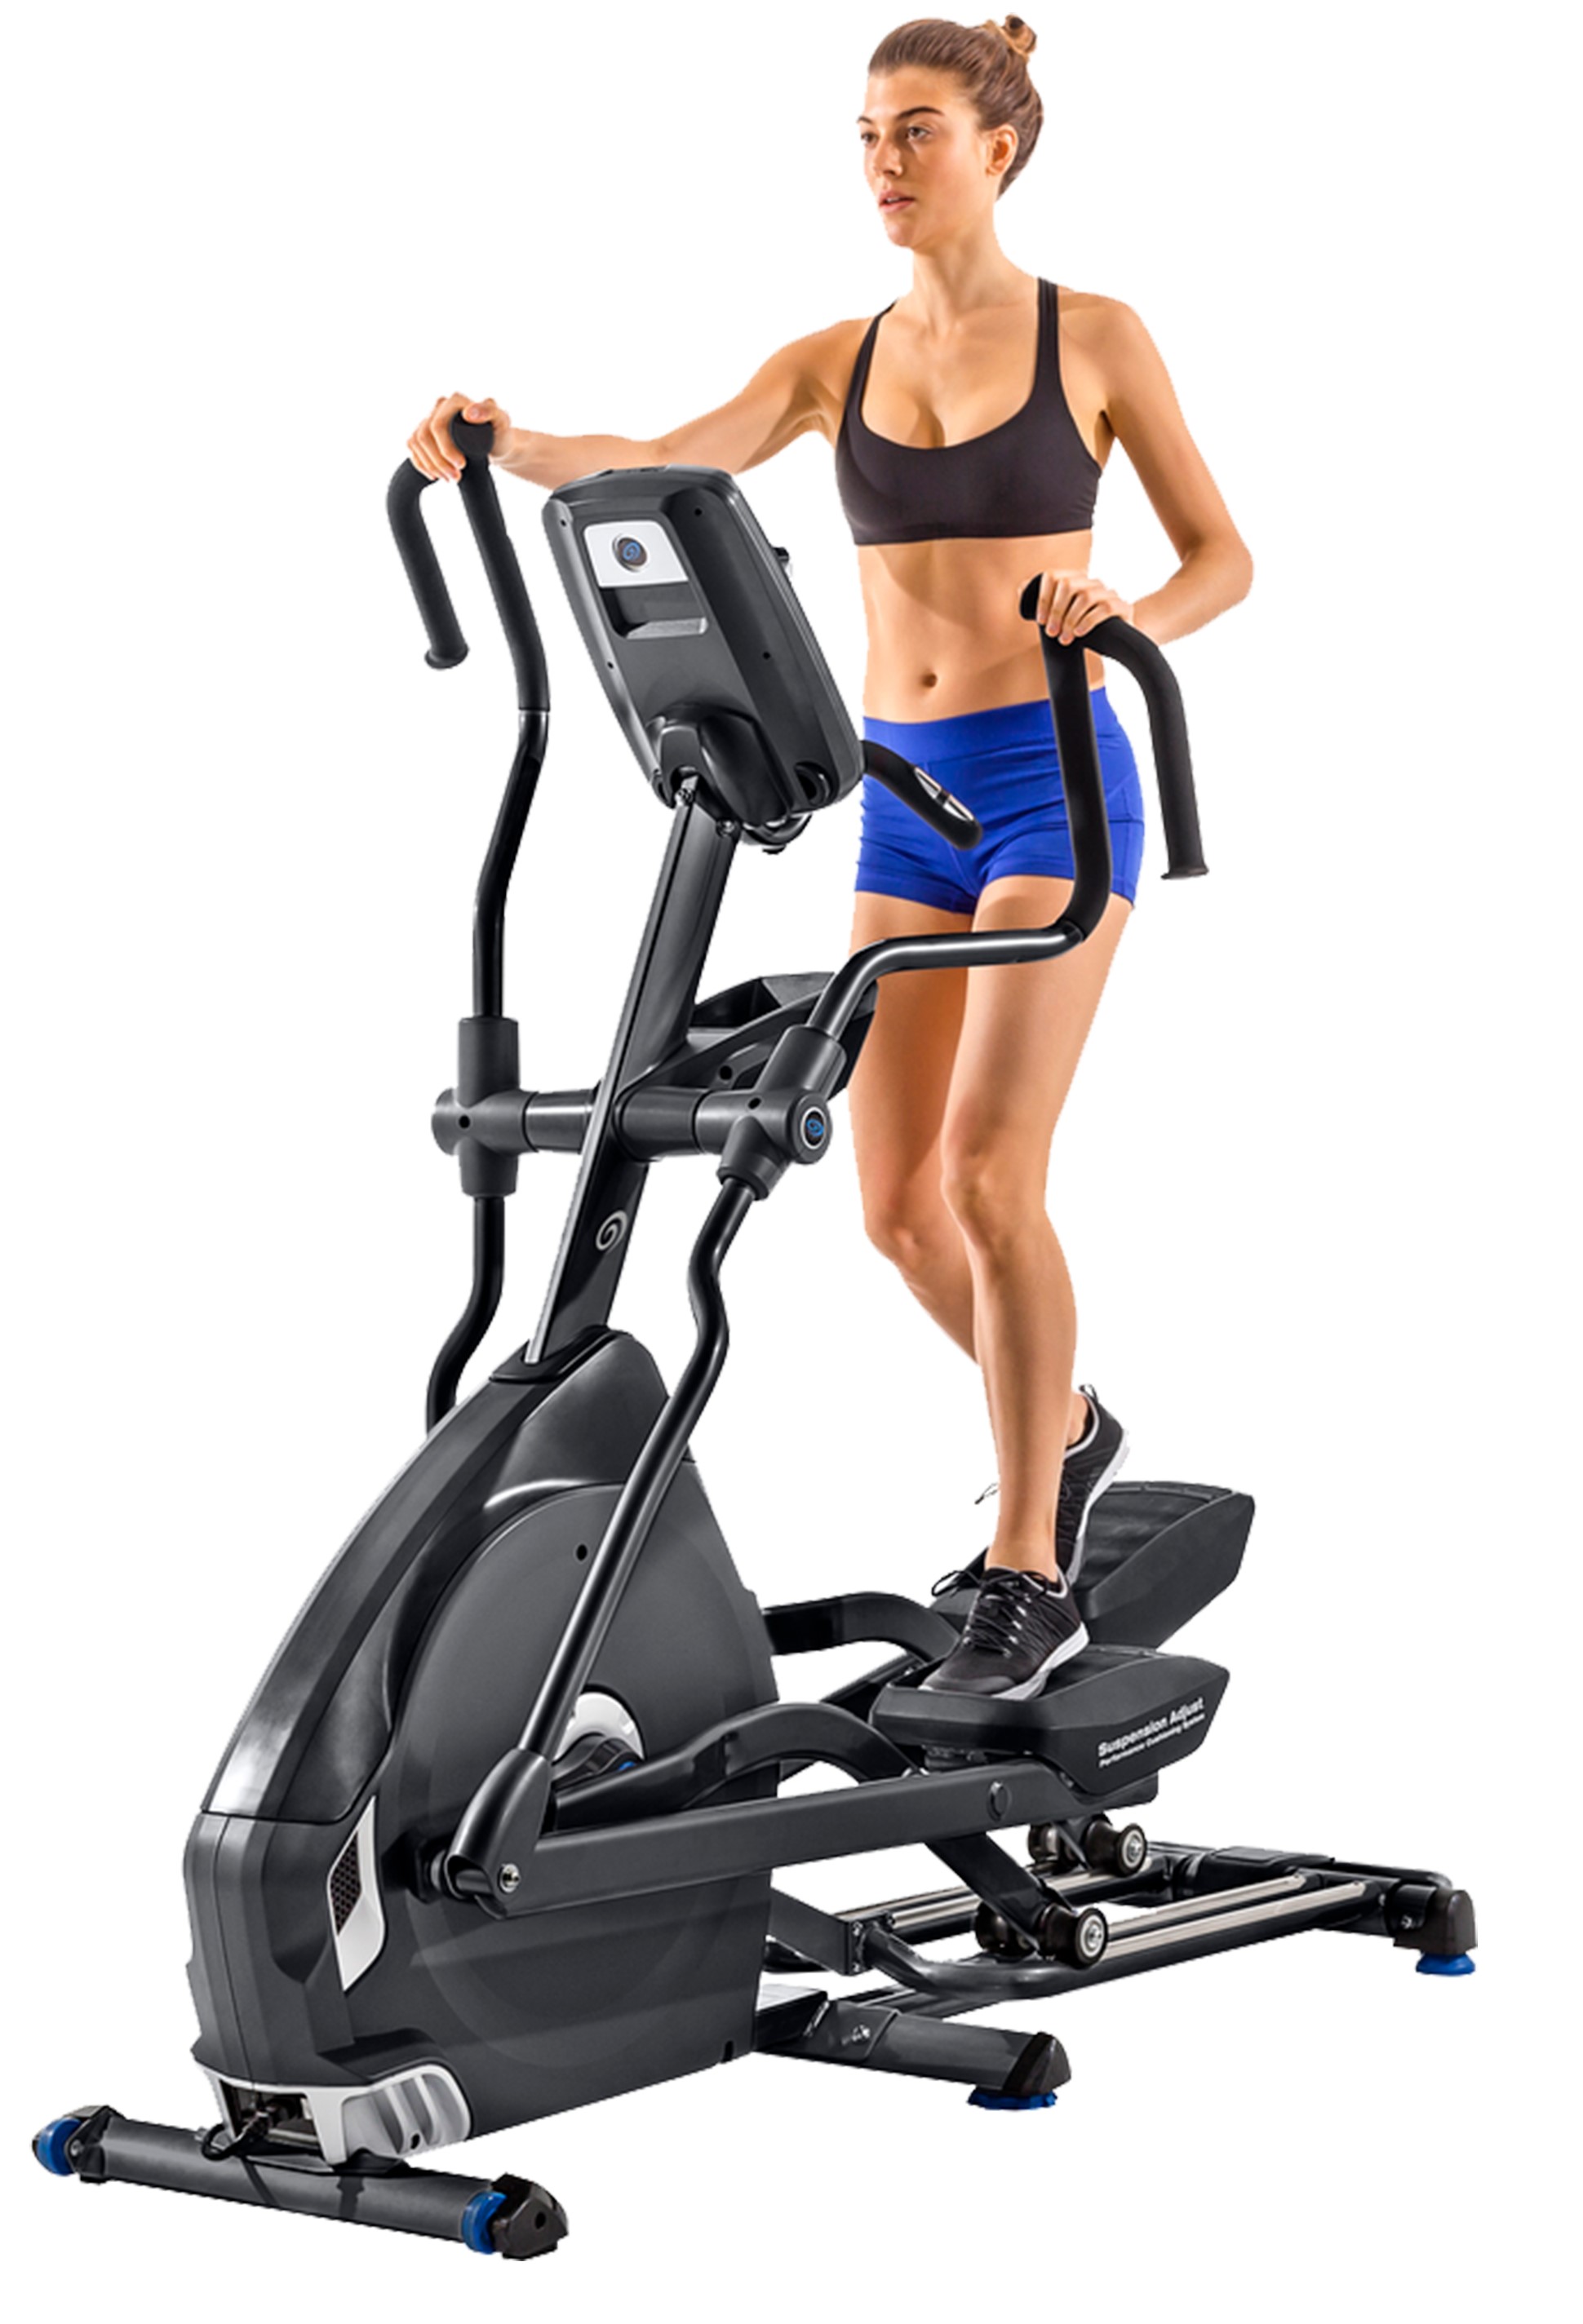 Nautilus E618 Performance Series Home and Gym Workout Cardio Elliptical Trainer - image 1 of 11